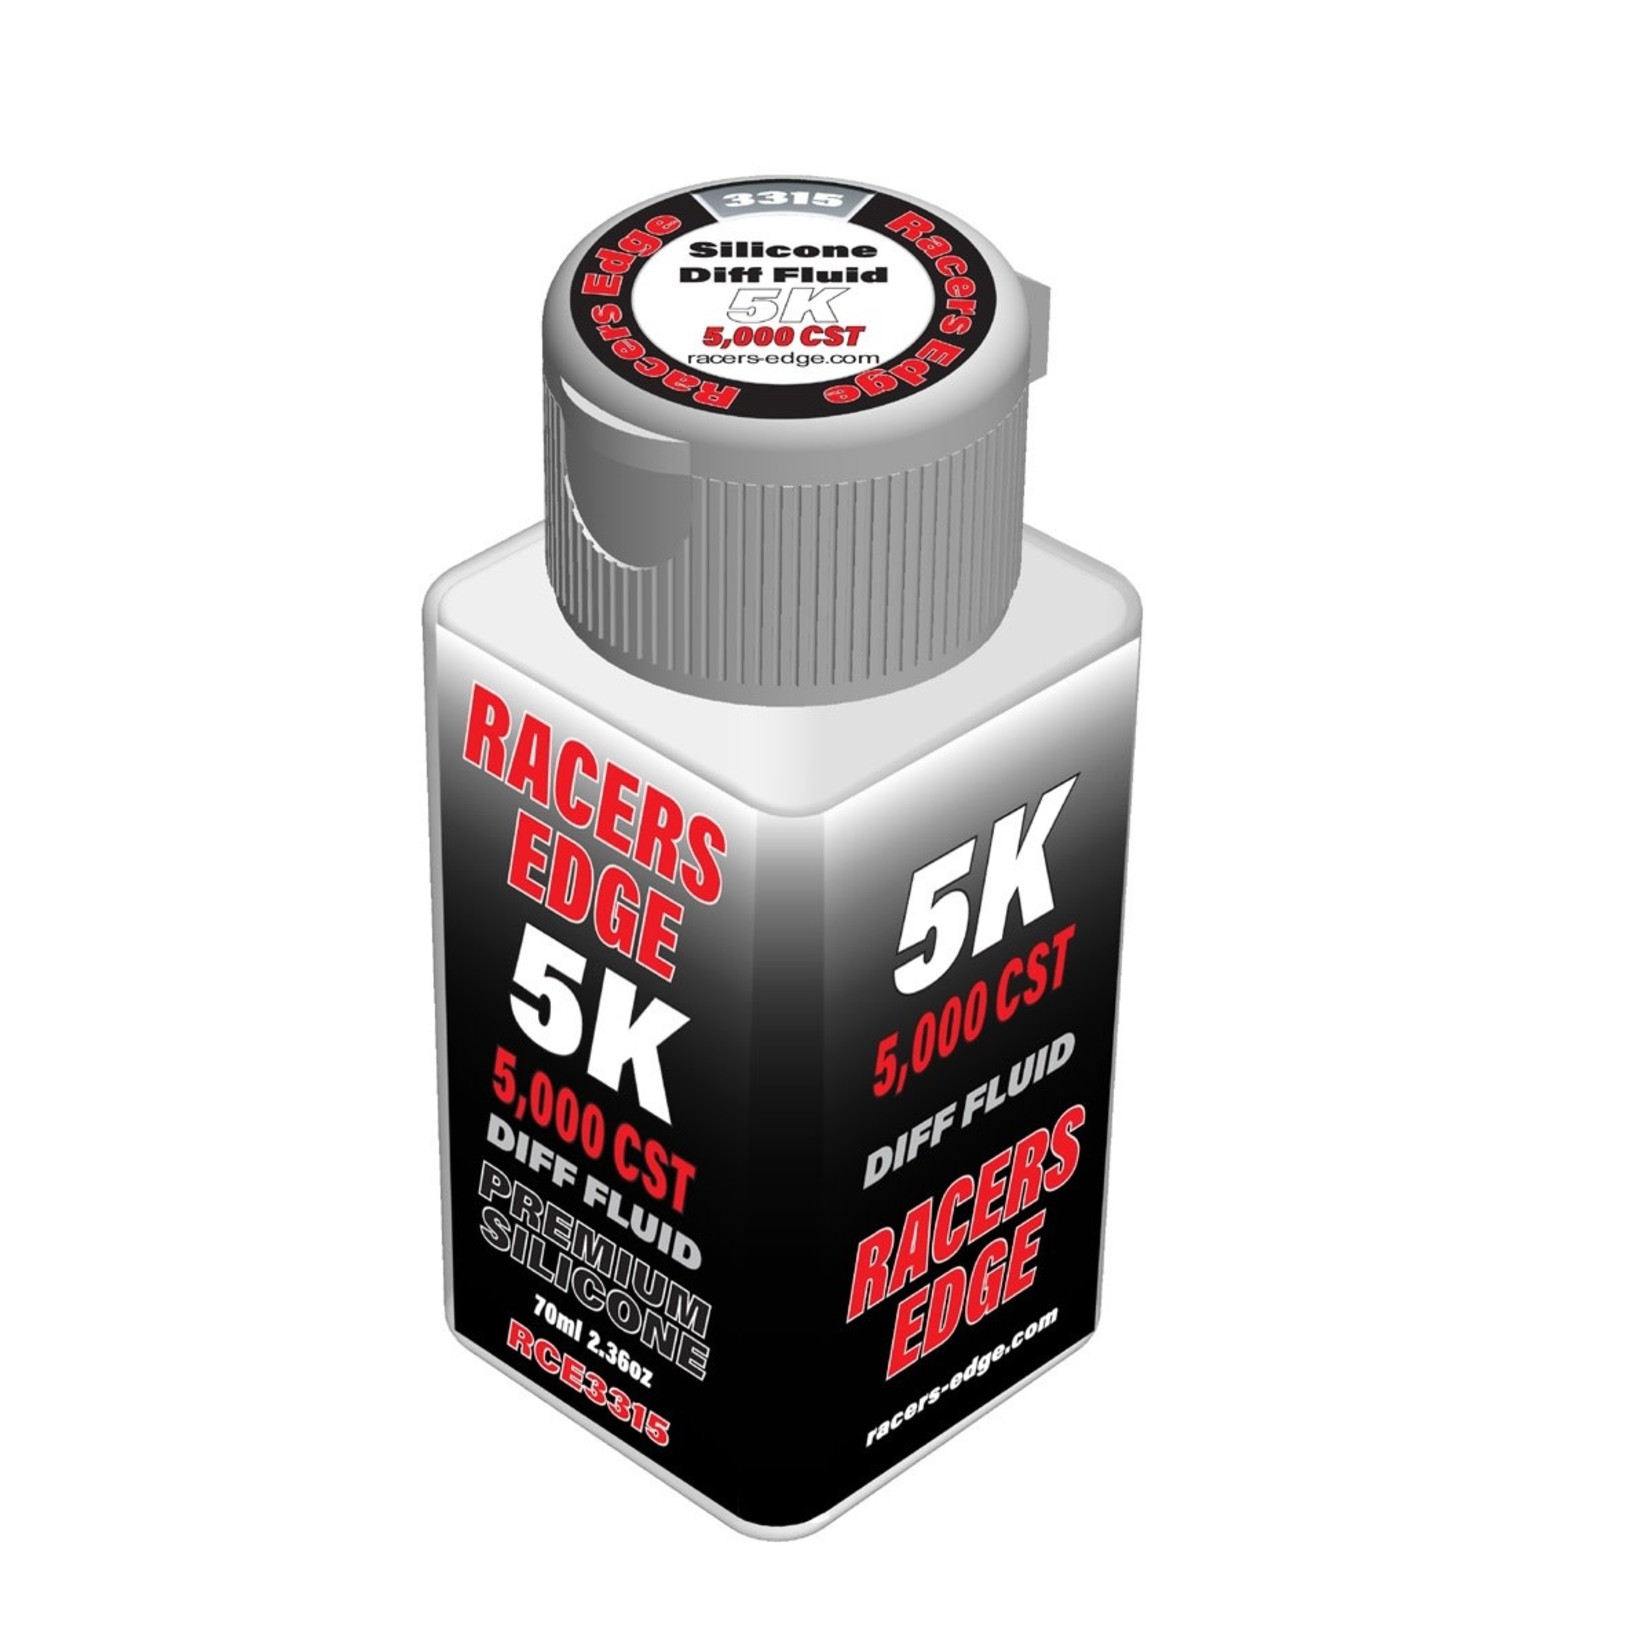 Racers Edge RCE3315 Racers Edge Pure Silicone Diff Fluid 5,000cst 70ml 2.36oz